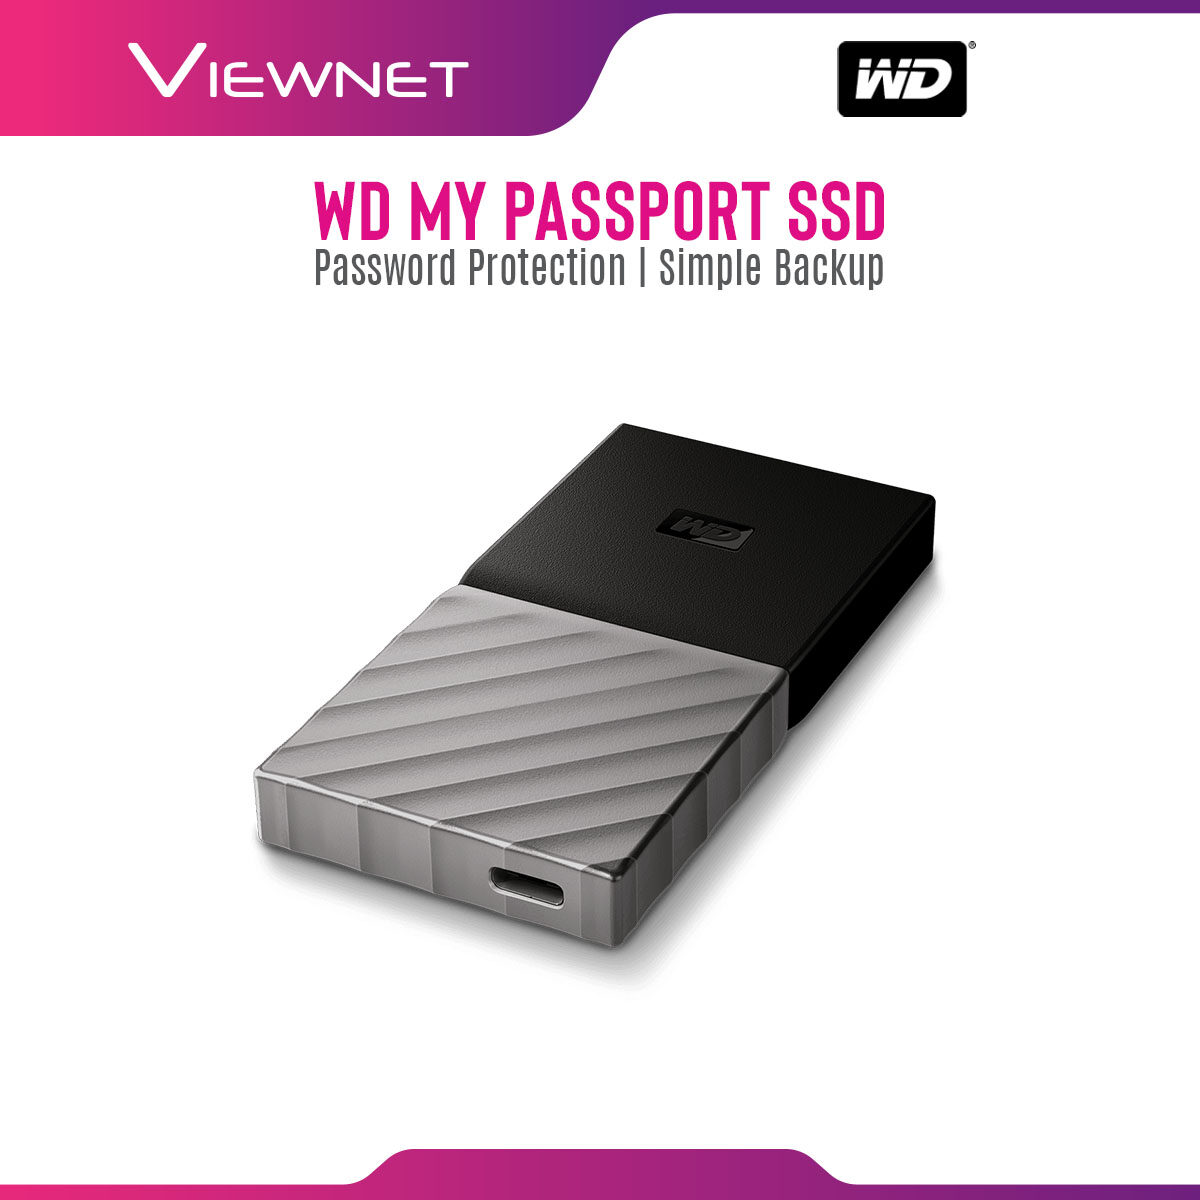 WD My Passport Portable External SSD USB3.1 Type-C (supports USB 3.1 Gen-2) Portable Solid State Drive 2TB with speeds up to 540MB/s USB Type-C to Type-A adapter Password Protection Hardware Encryption Built for Mac or PC